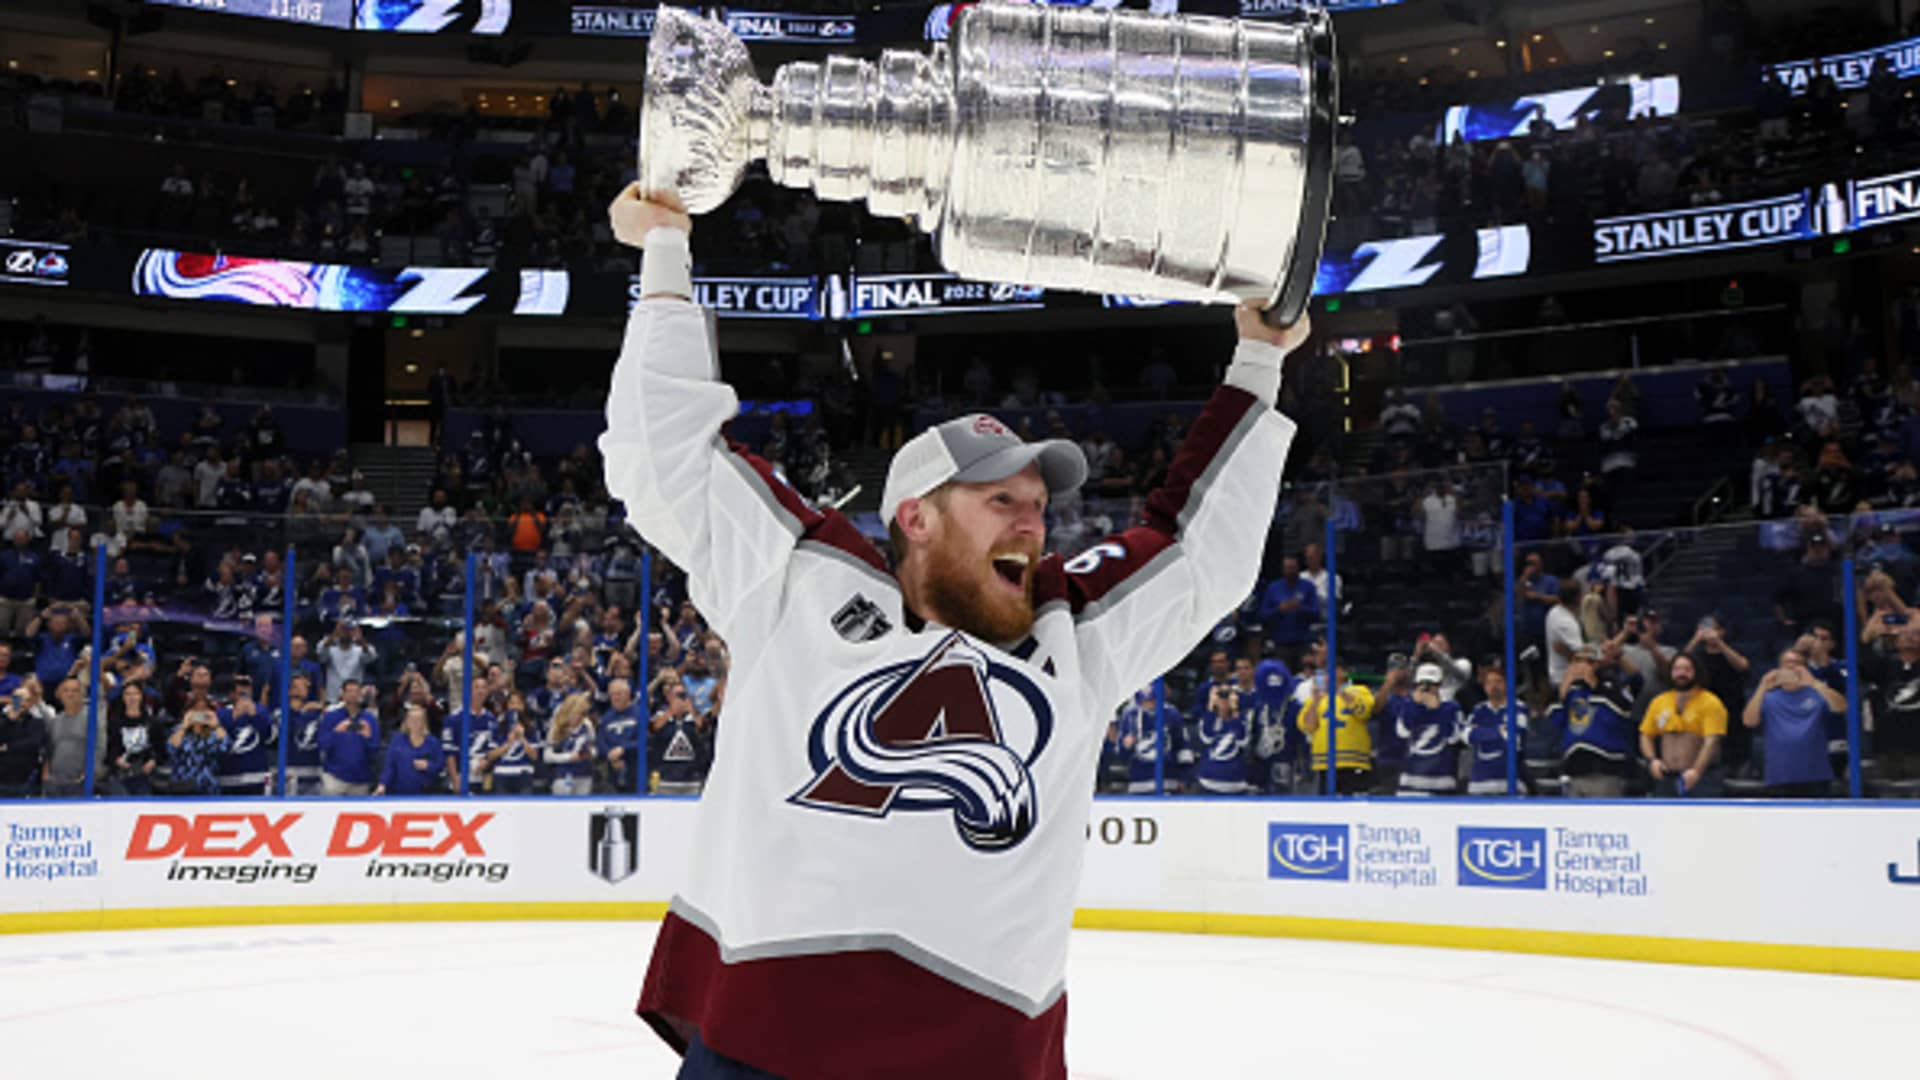 2023 Stanley Cup Futures Posted: Avalanche Lead the Way